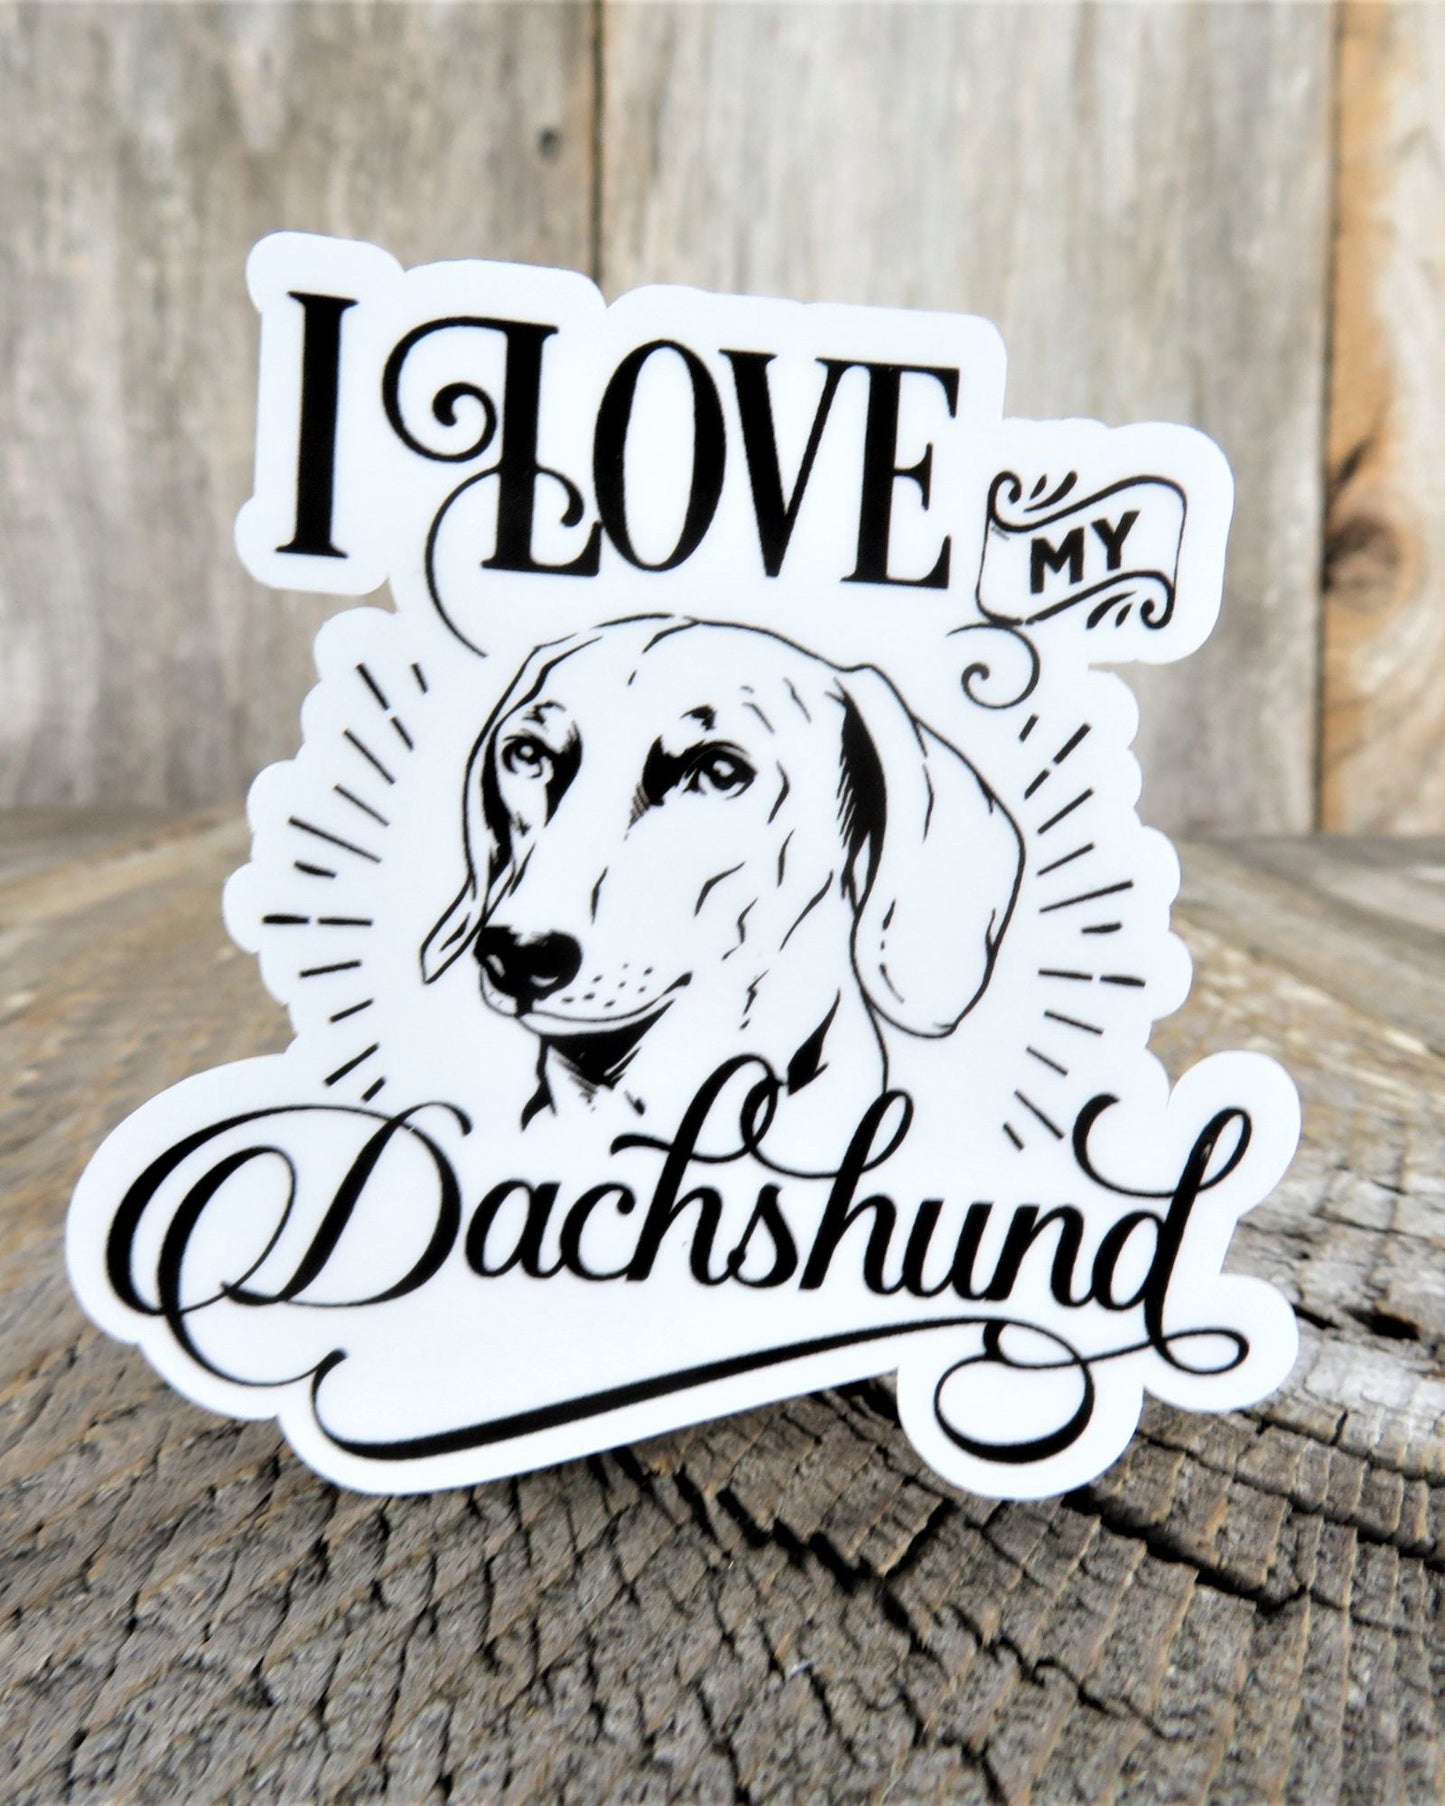 I Love My Dachshund Dog Sticker Decal Black and White Waterproof Dog Lover Gift for Car Water Bottle Laptop